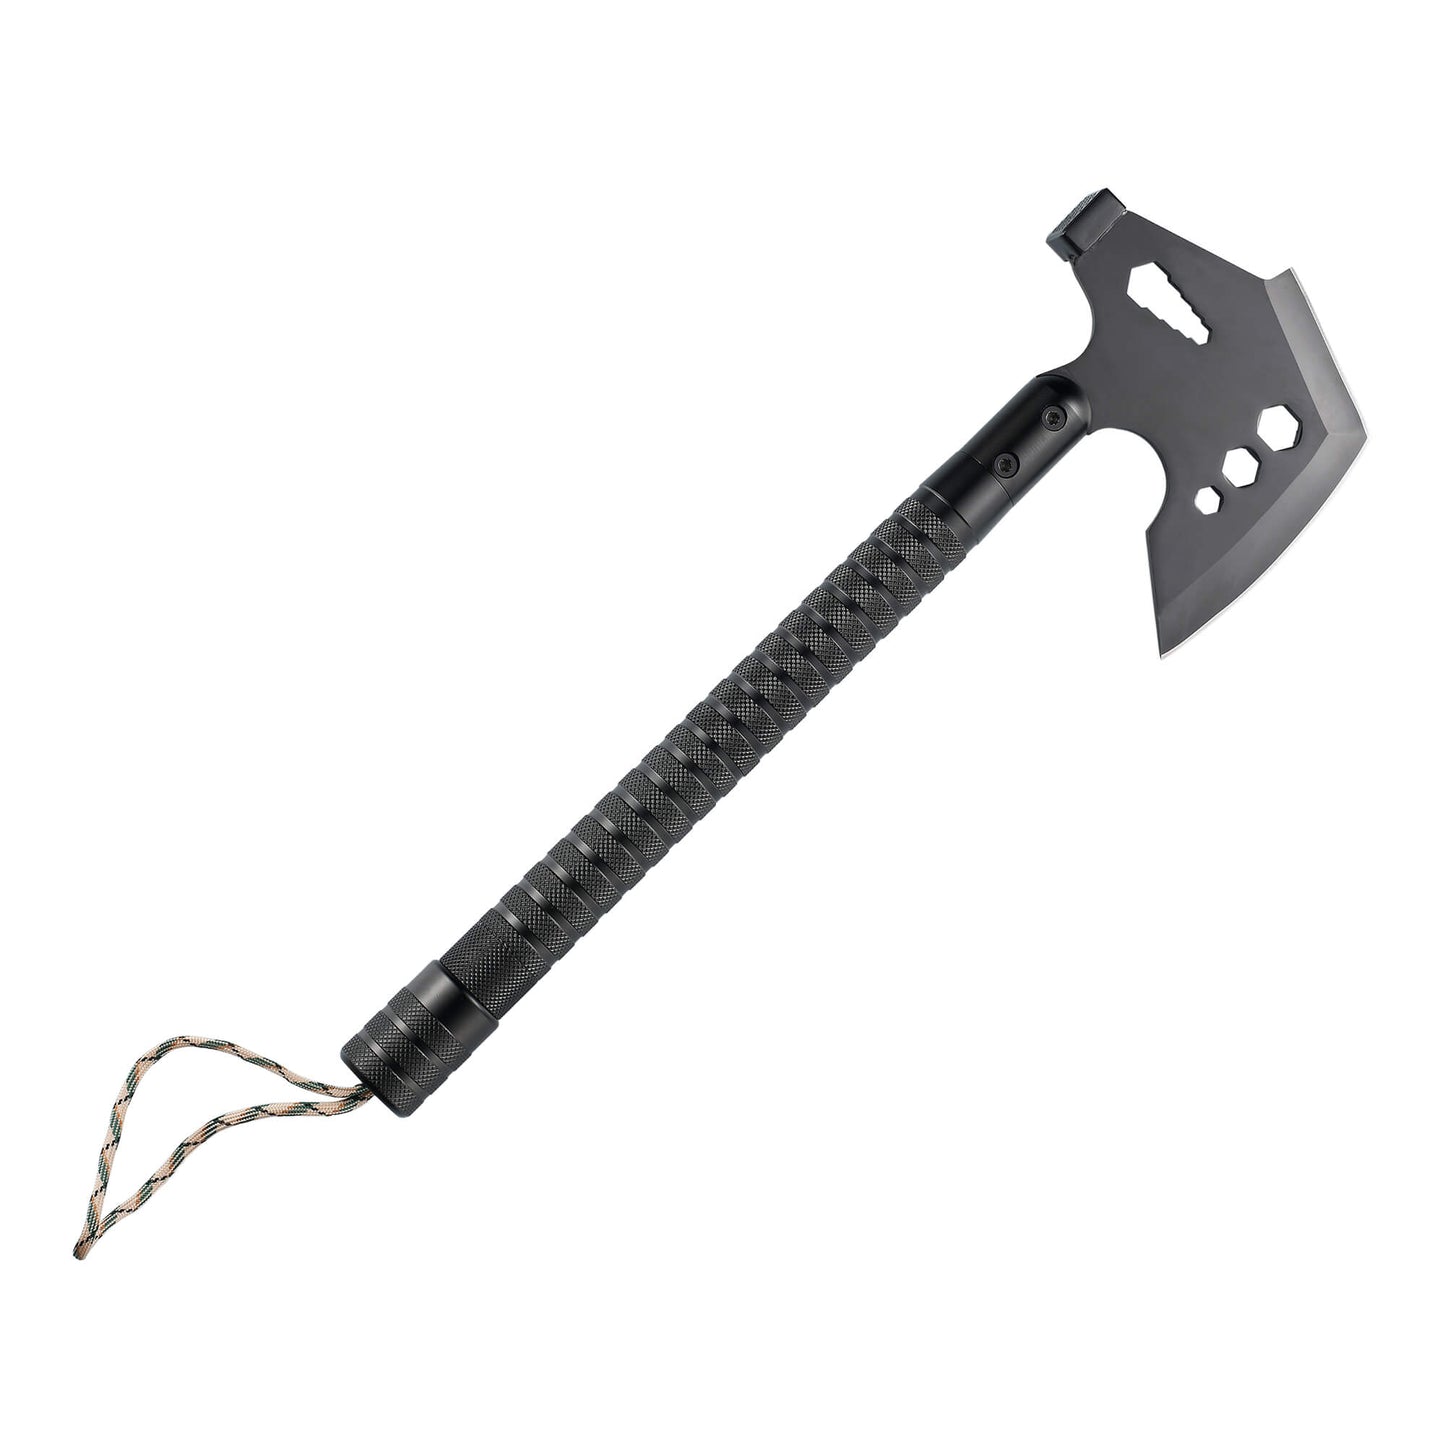 Tactical GRID-AX camping tool with Axe Knife, Wood Saw, Bottle Opener, Whistle, Flint Stone, Glass Breaker, Compass, Rope.